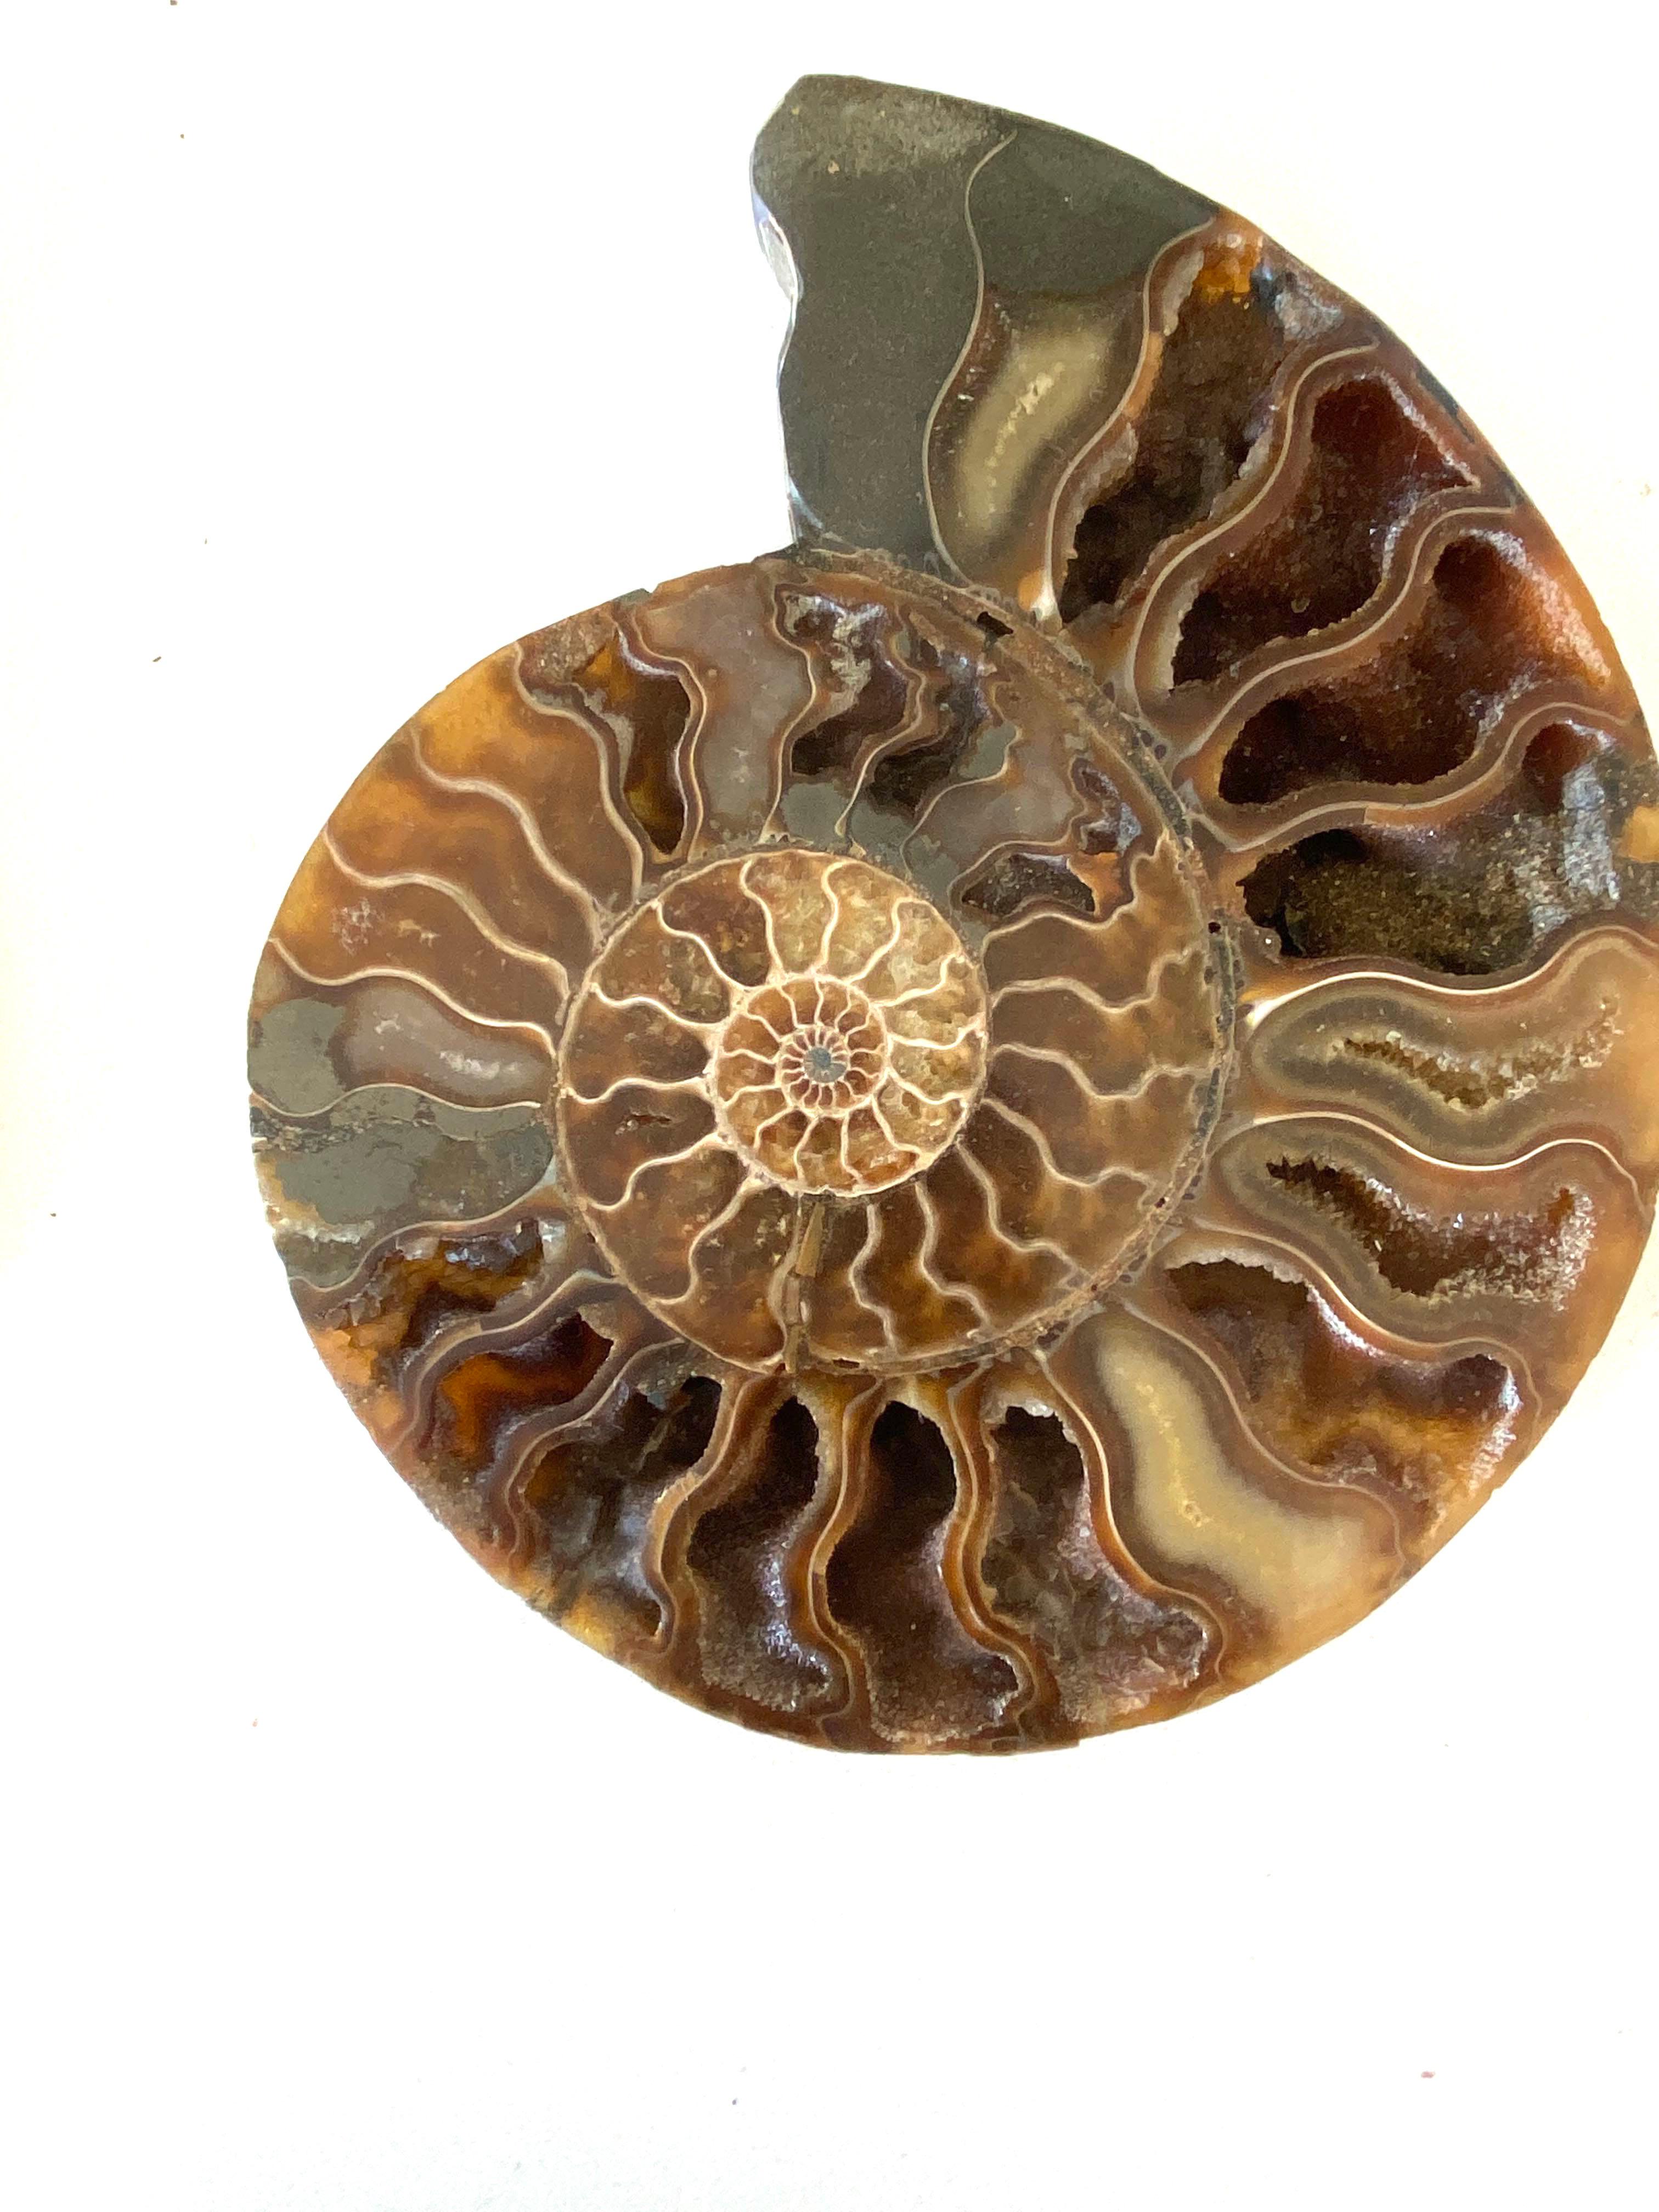 Malagasy Shades of Browns Pair of Ammonite Sculptures, Madagascar, Prehistoric